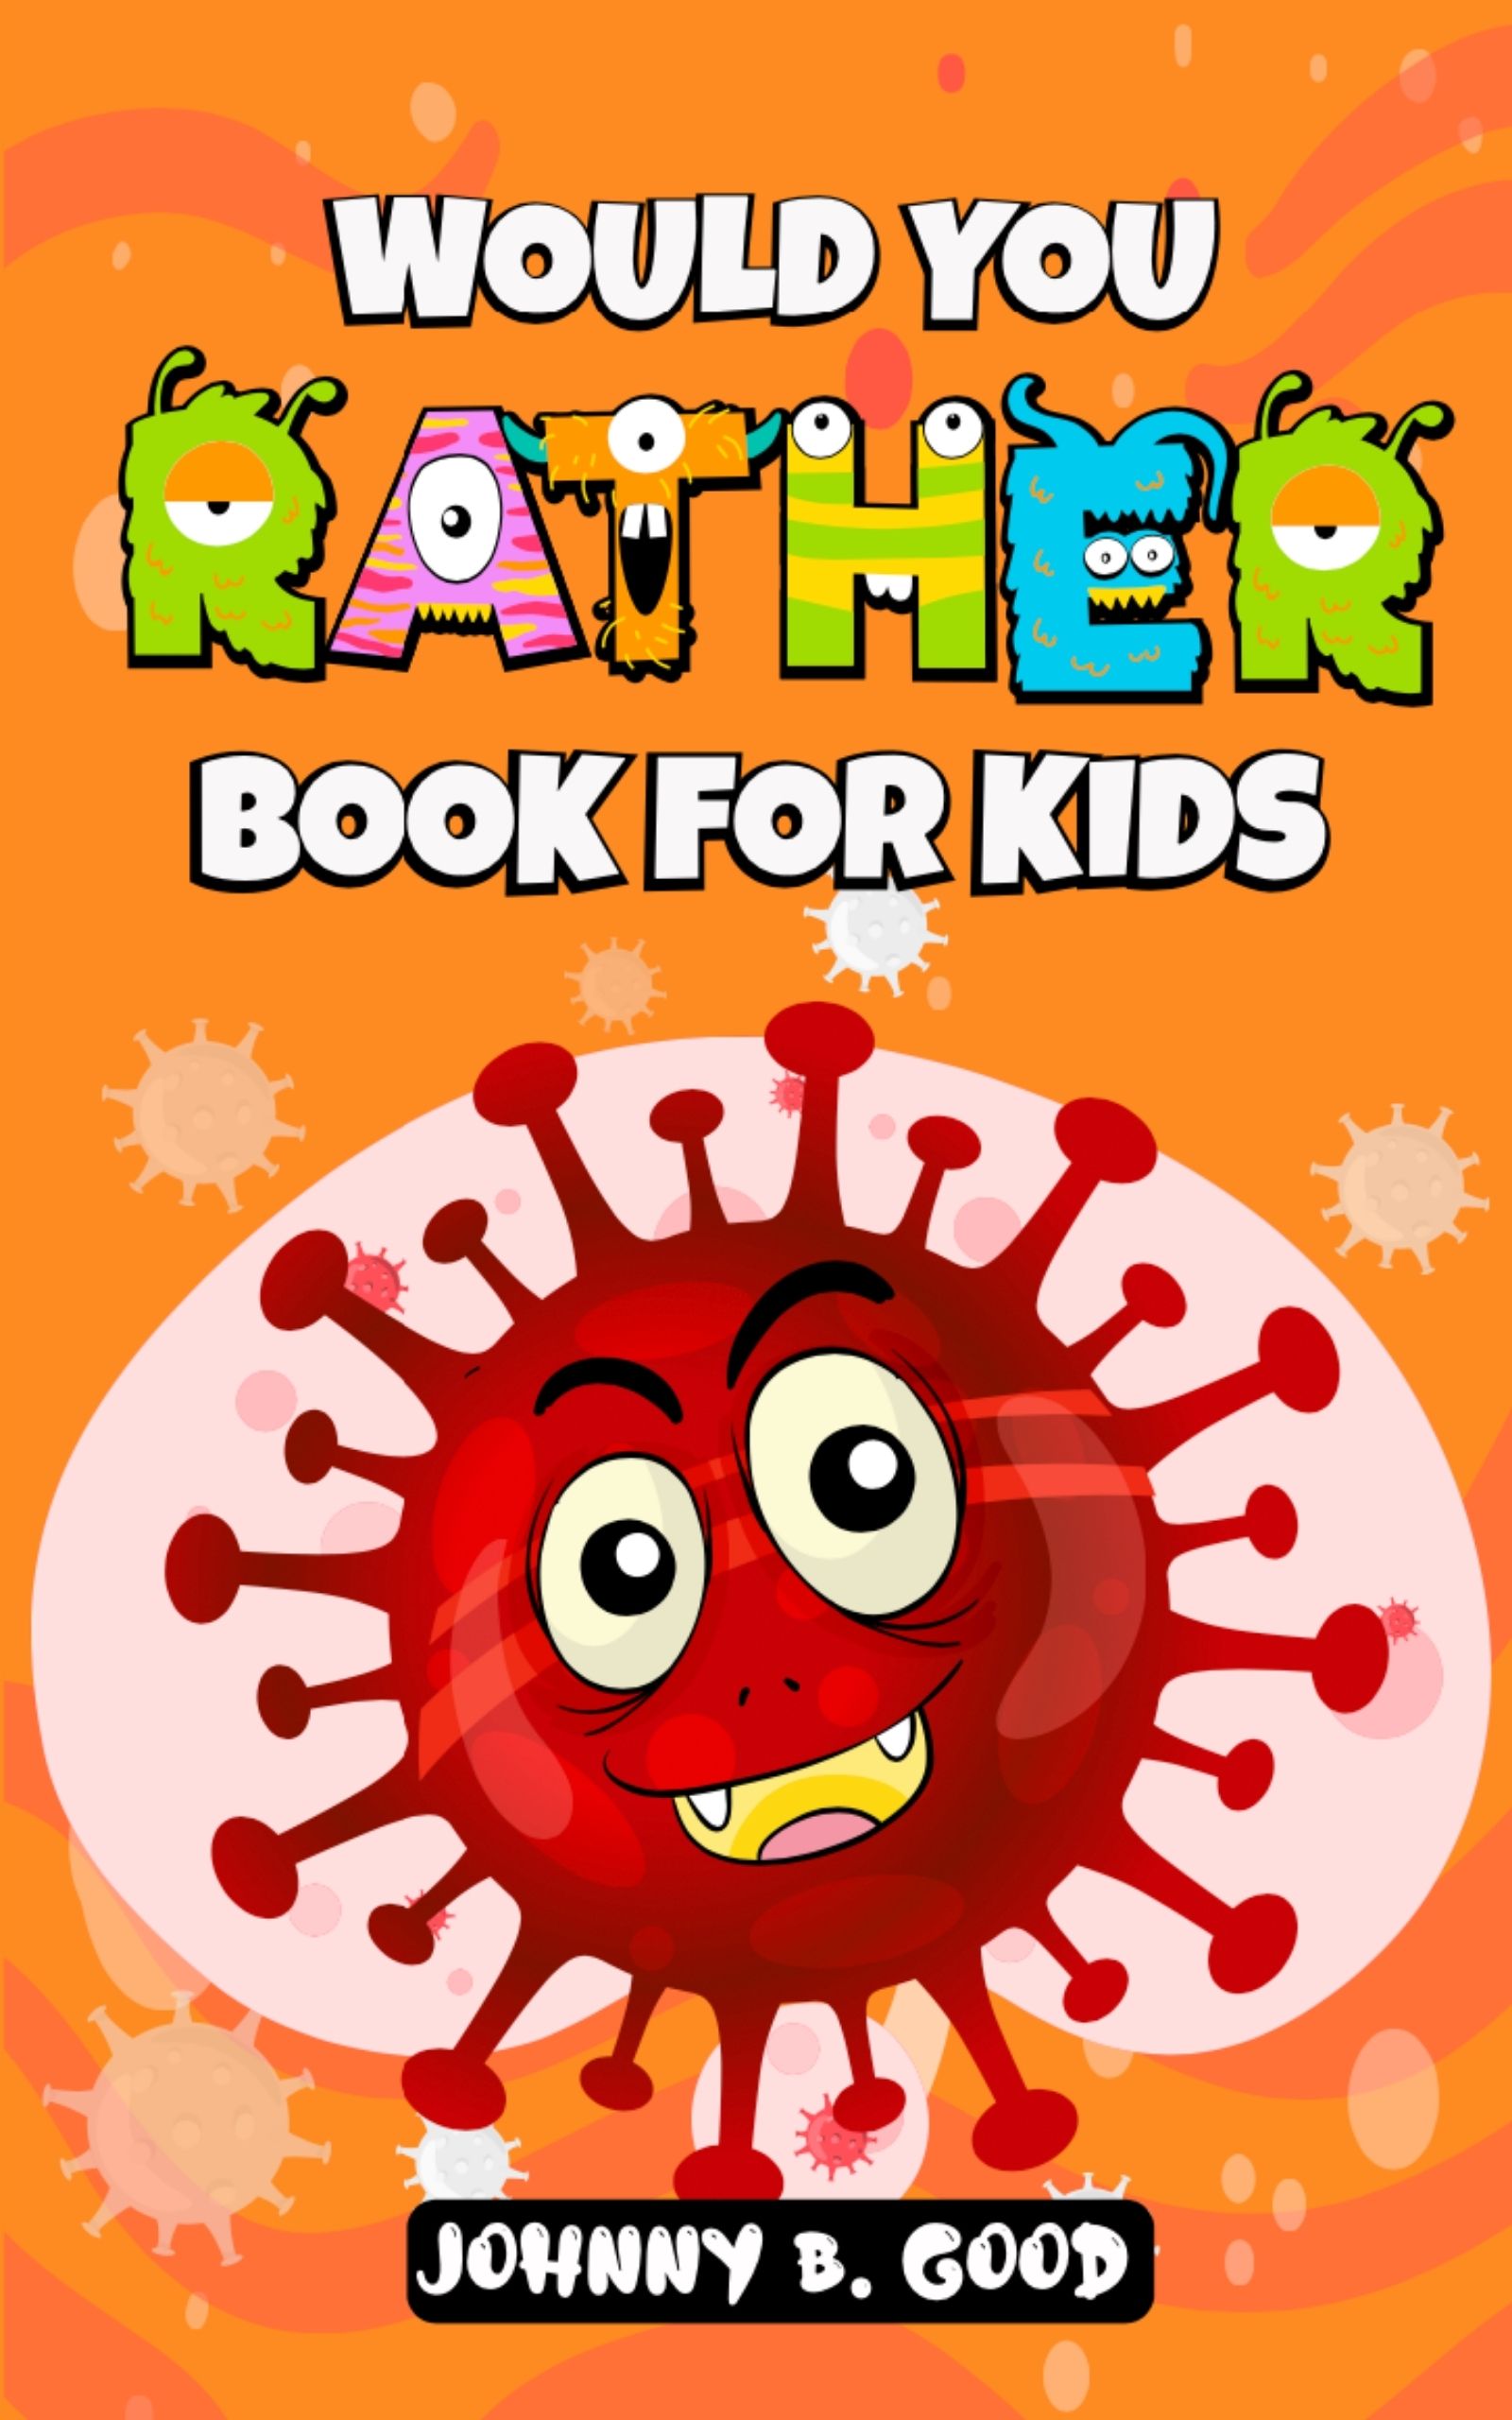 FREE: Would you Rather Book For Kids by Johnny B. Good